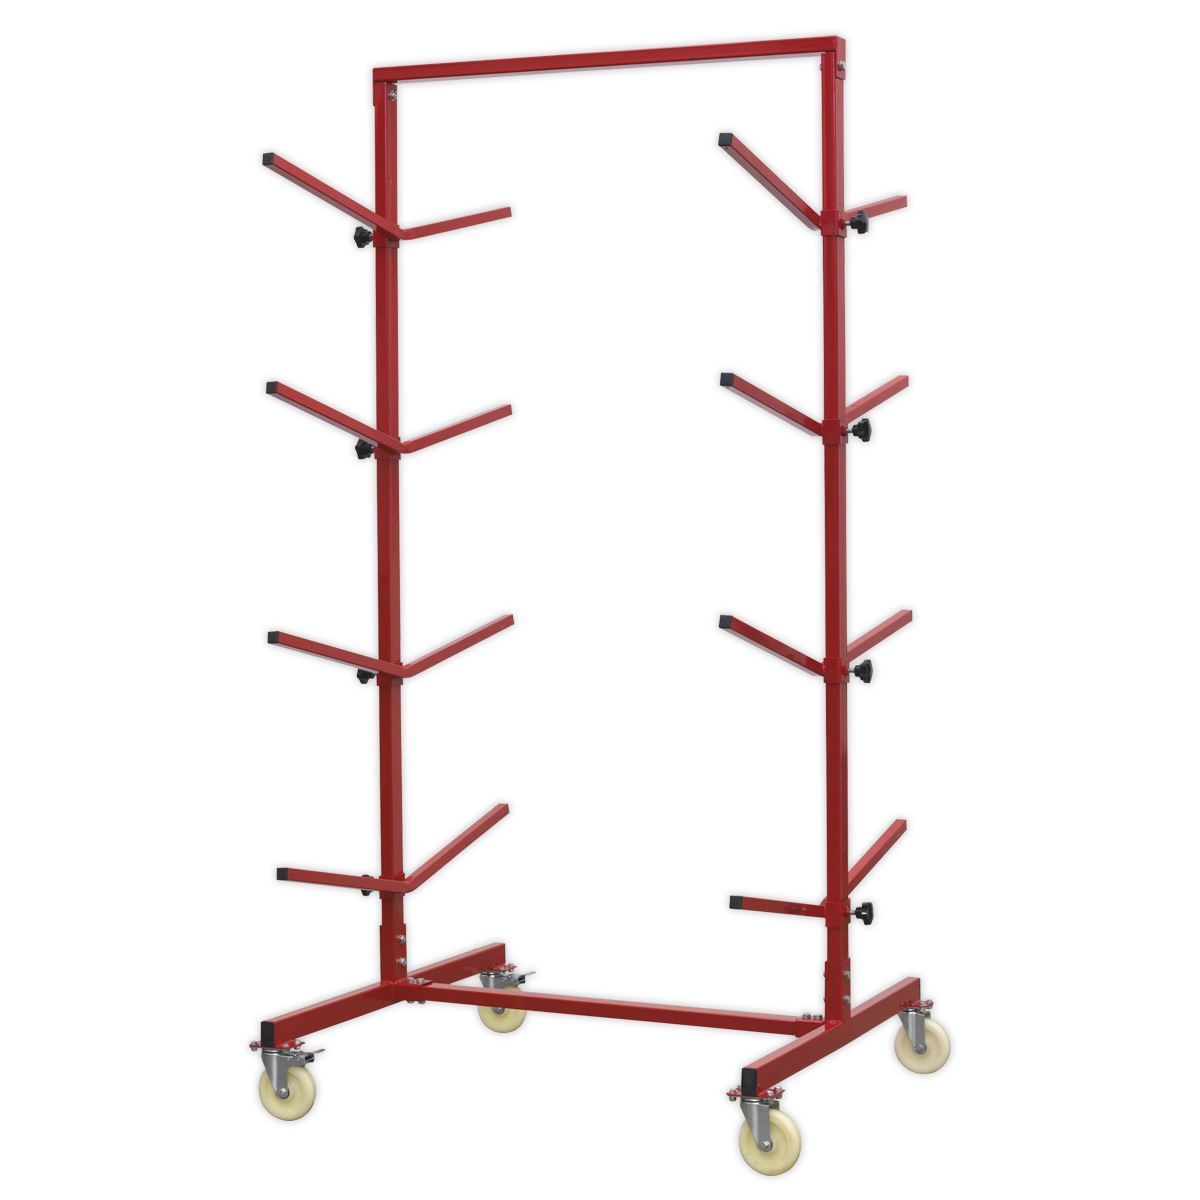 Sealey Bumper Rack Double-Sided 4-Level